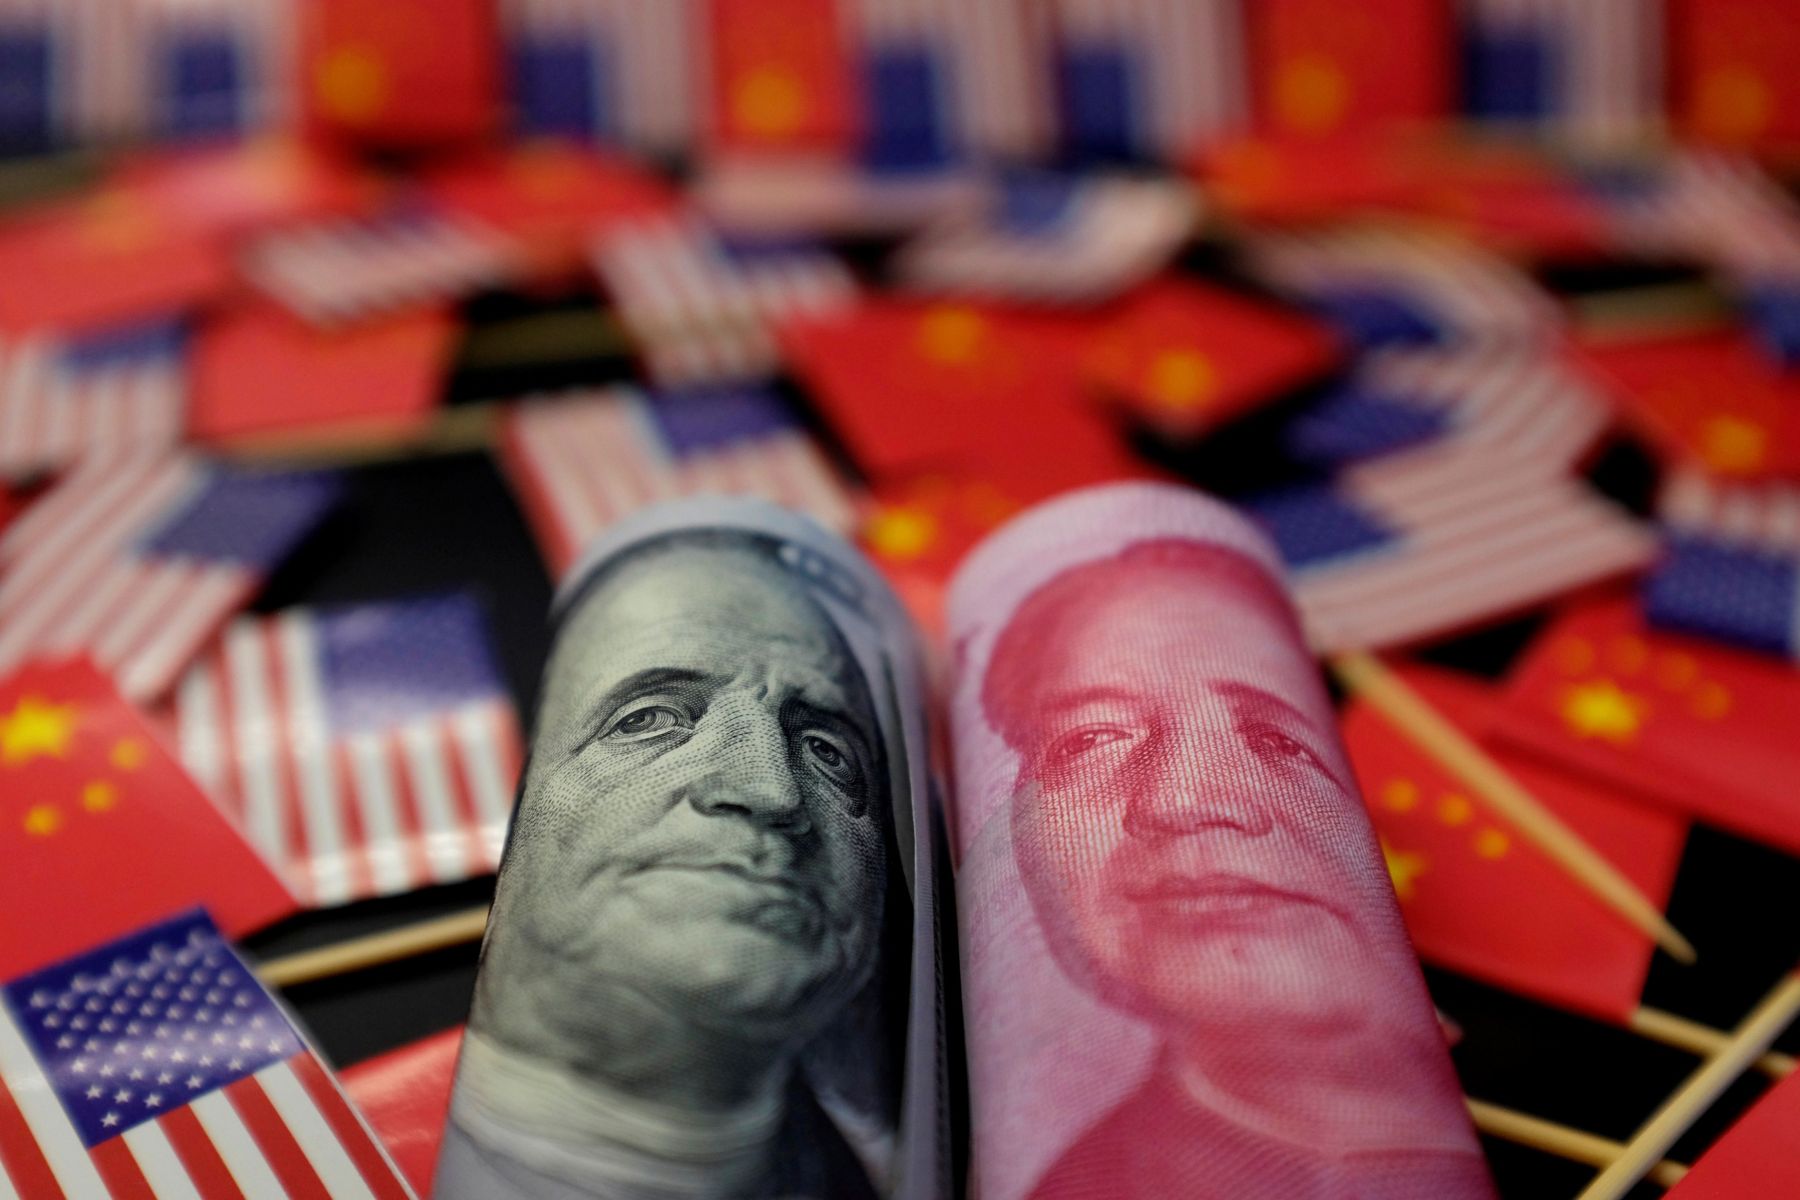 Illustration picture showing U.S. dollar and China’s yuan banknotes